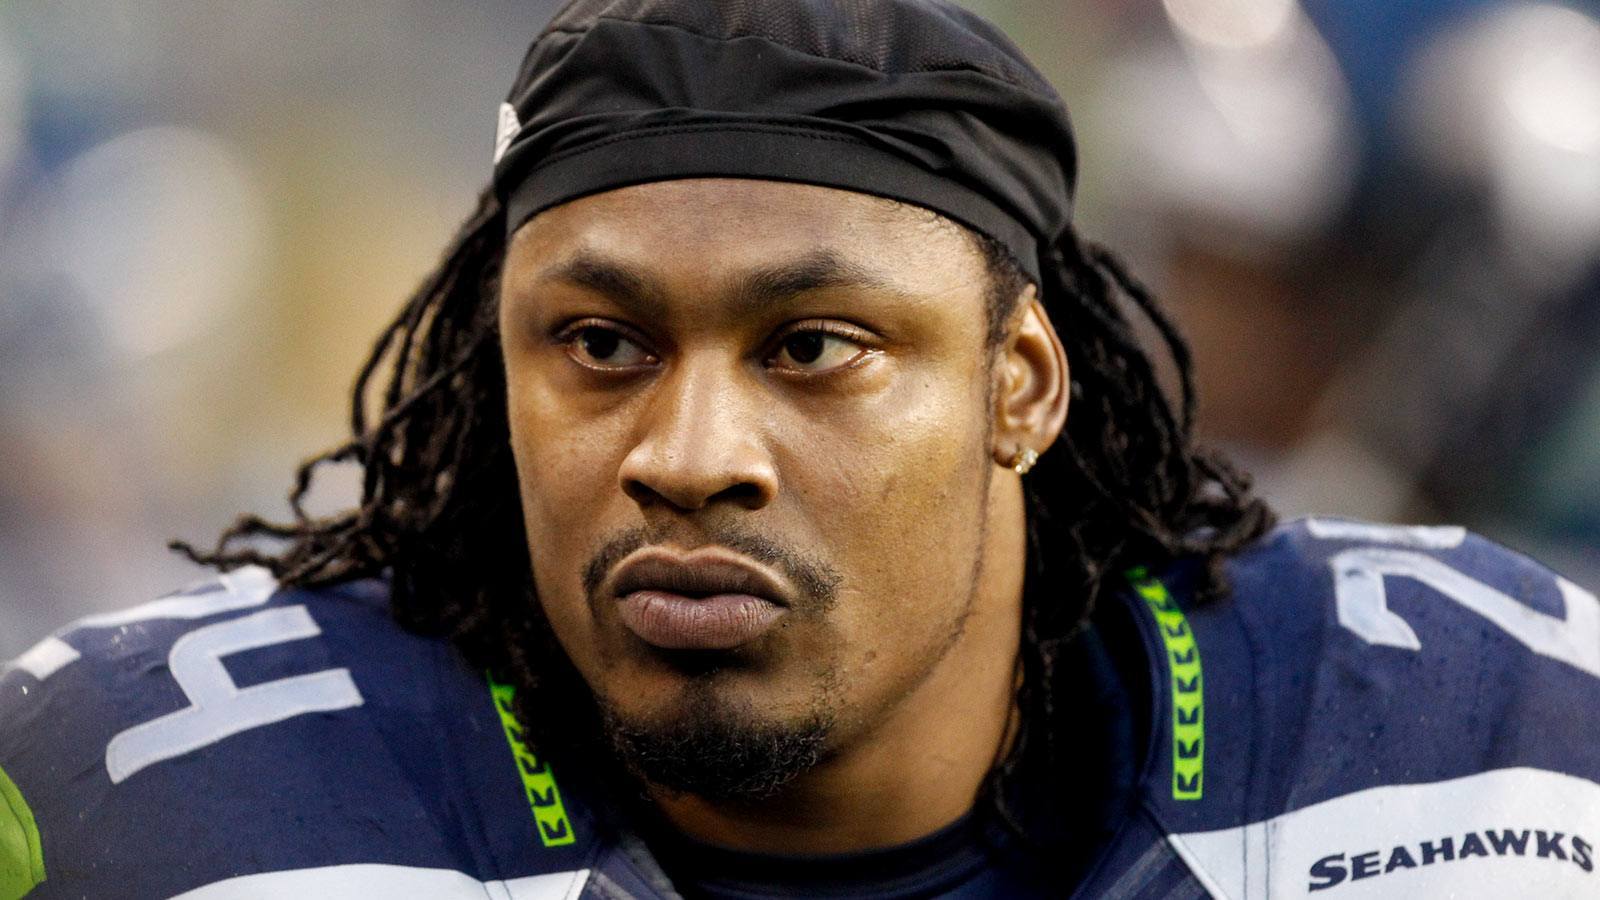 Seahawks Marshawn Lynch Gambles For Better Contract